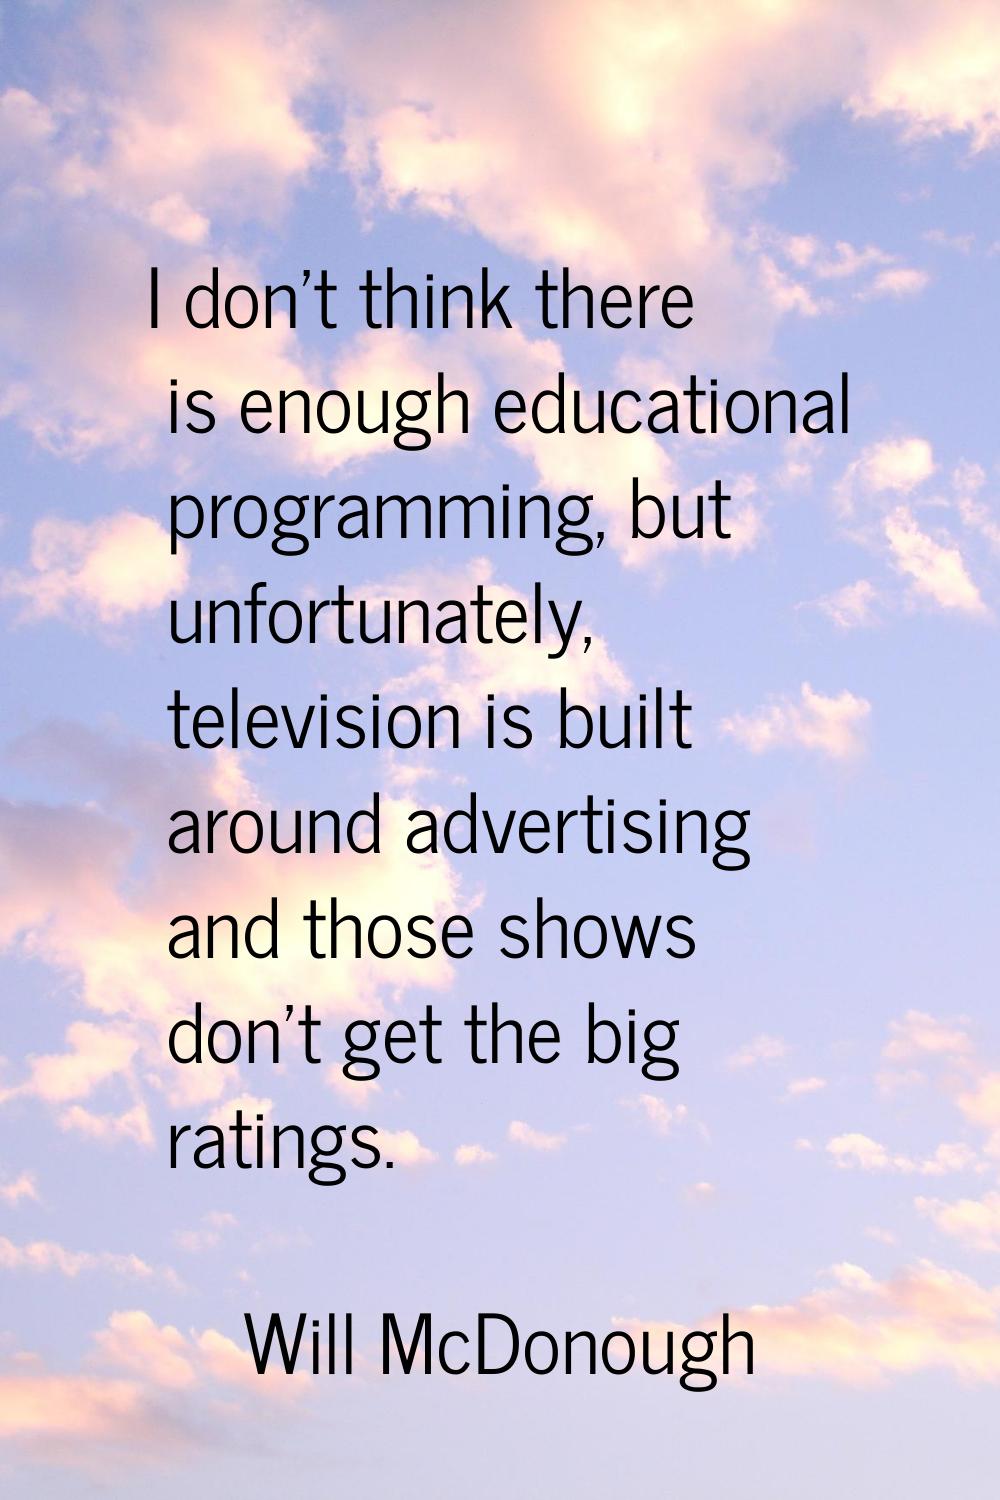 I don't think there is enough educational programming, but unfortunately, television is built aroun